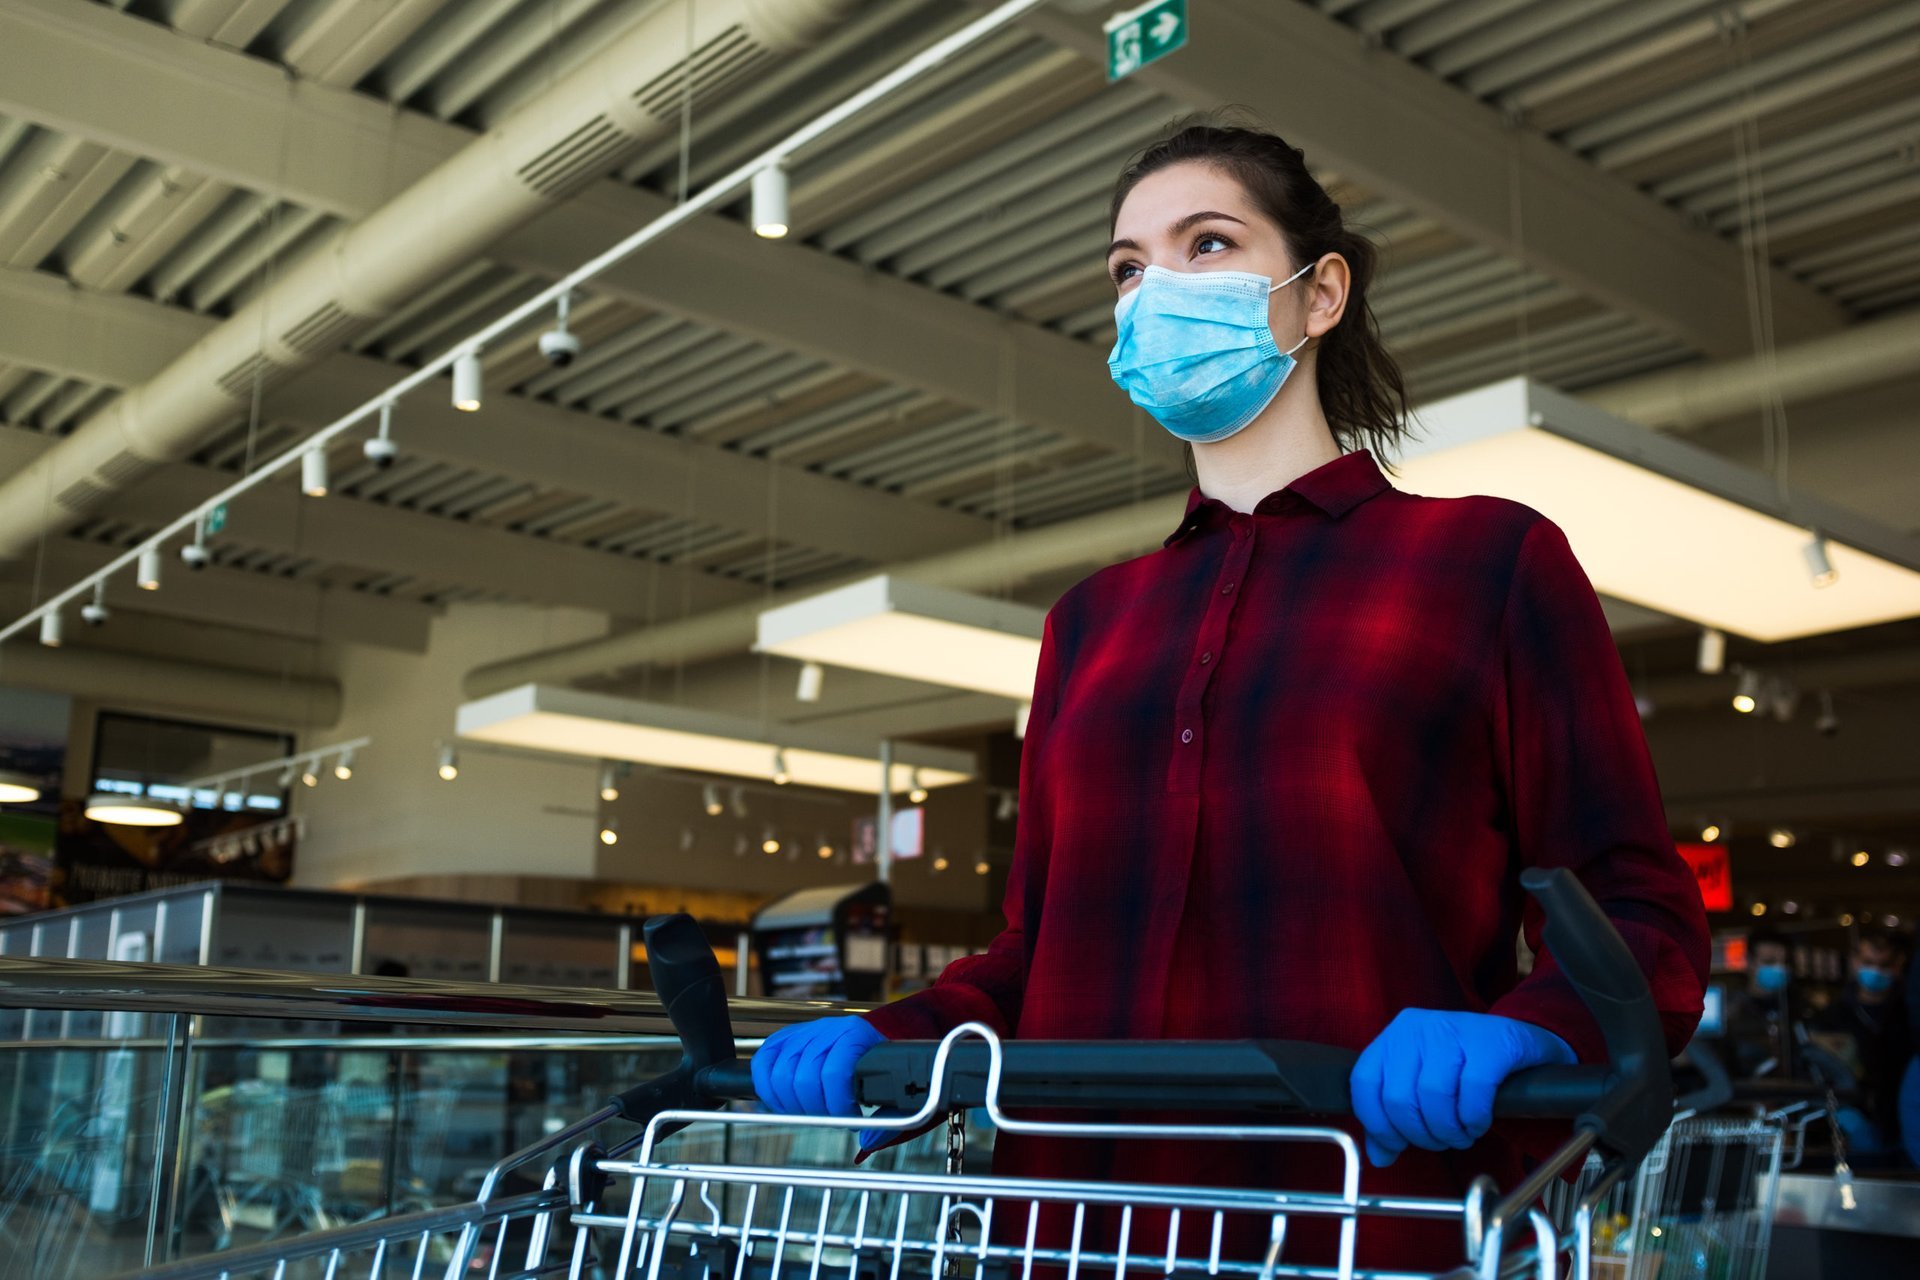 A woman in a mask pushing a grocery cart